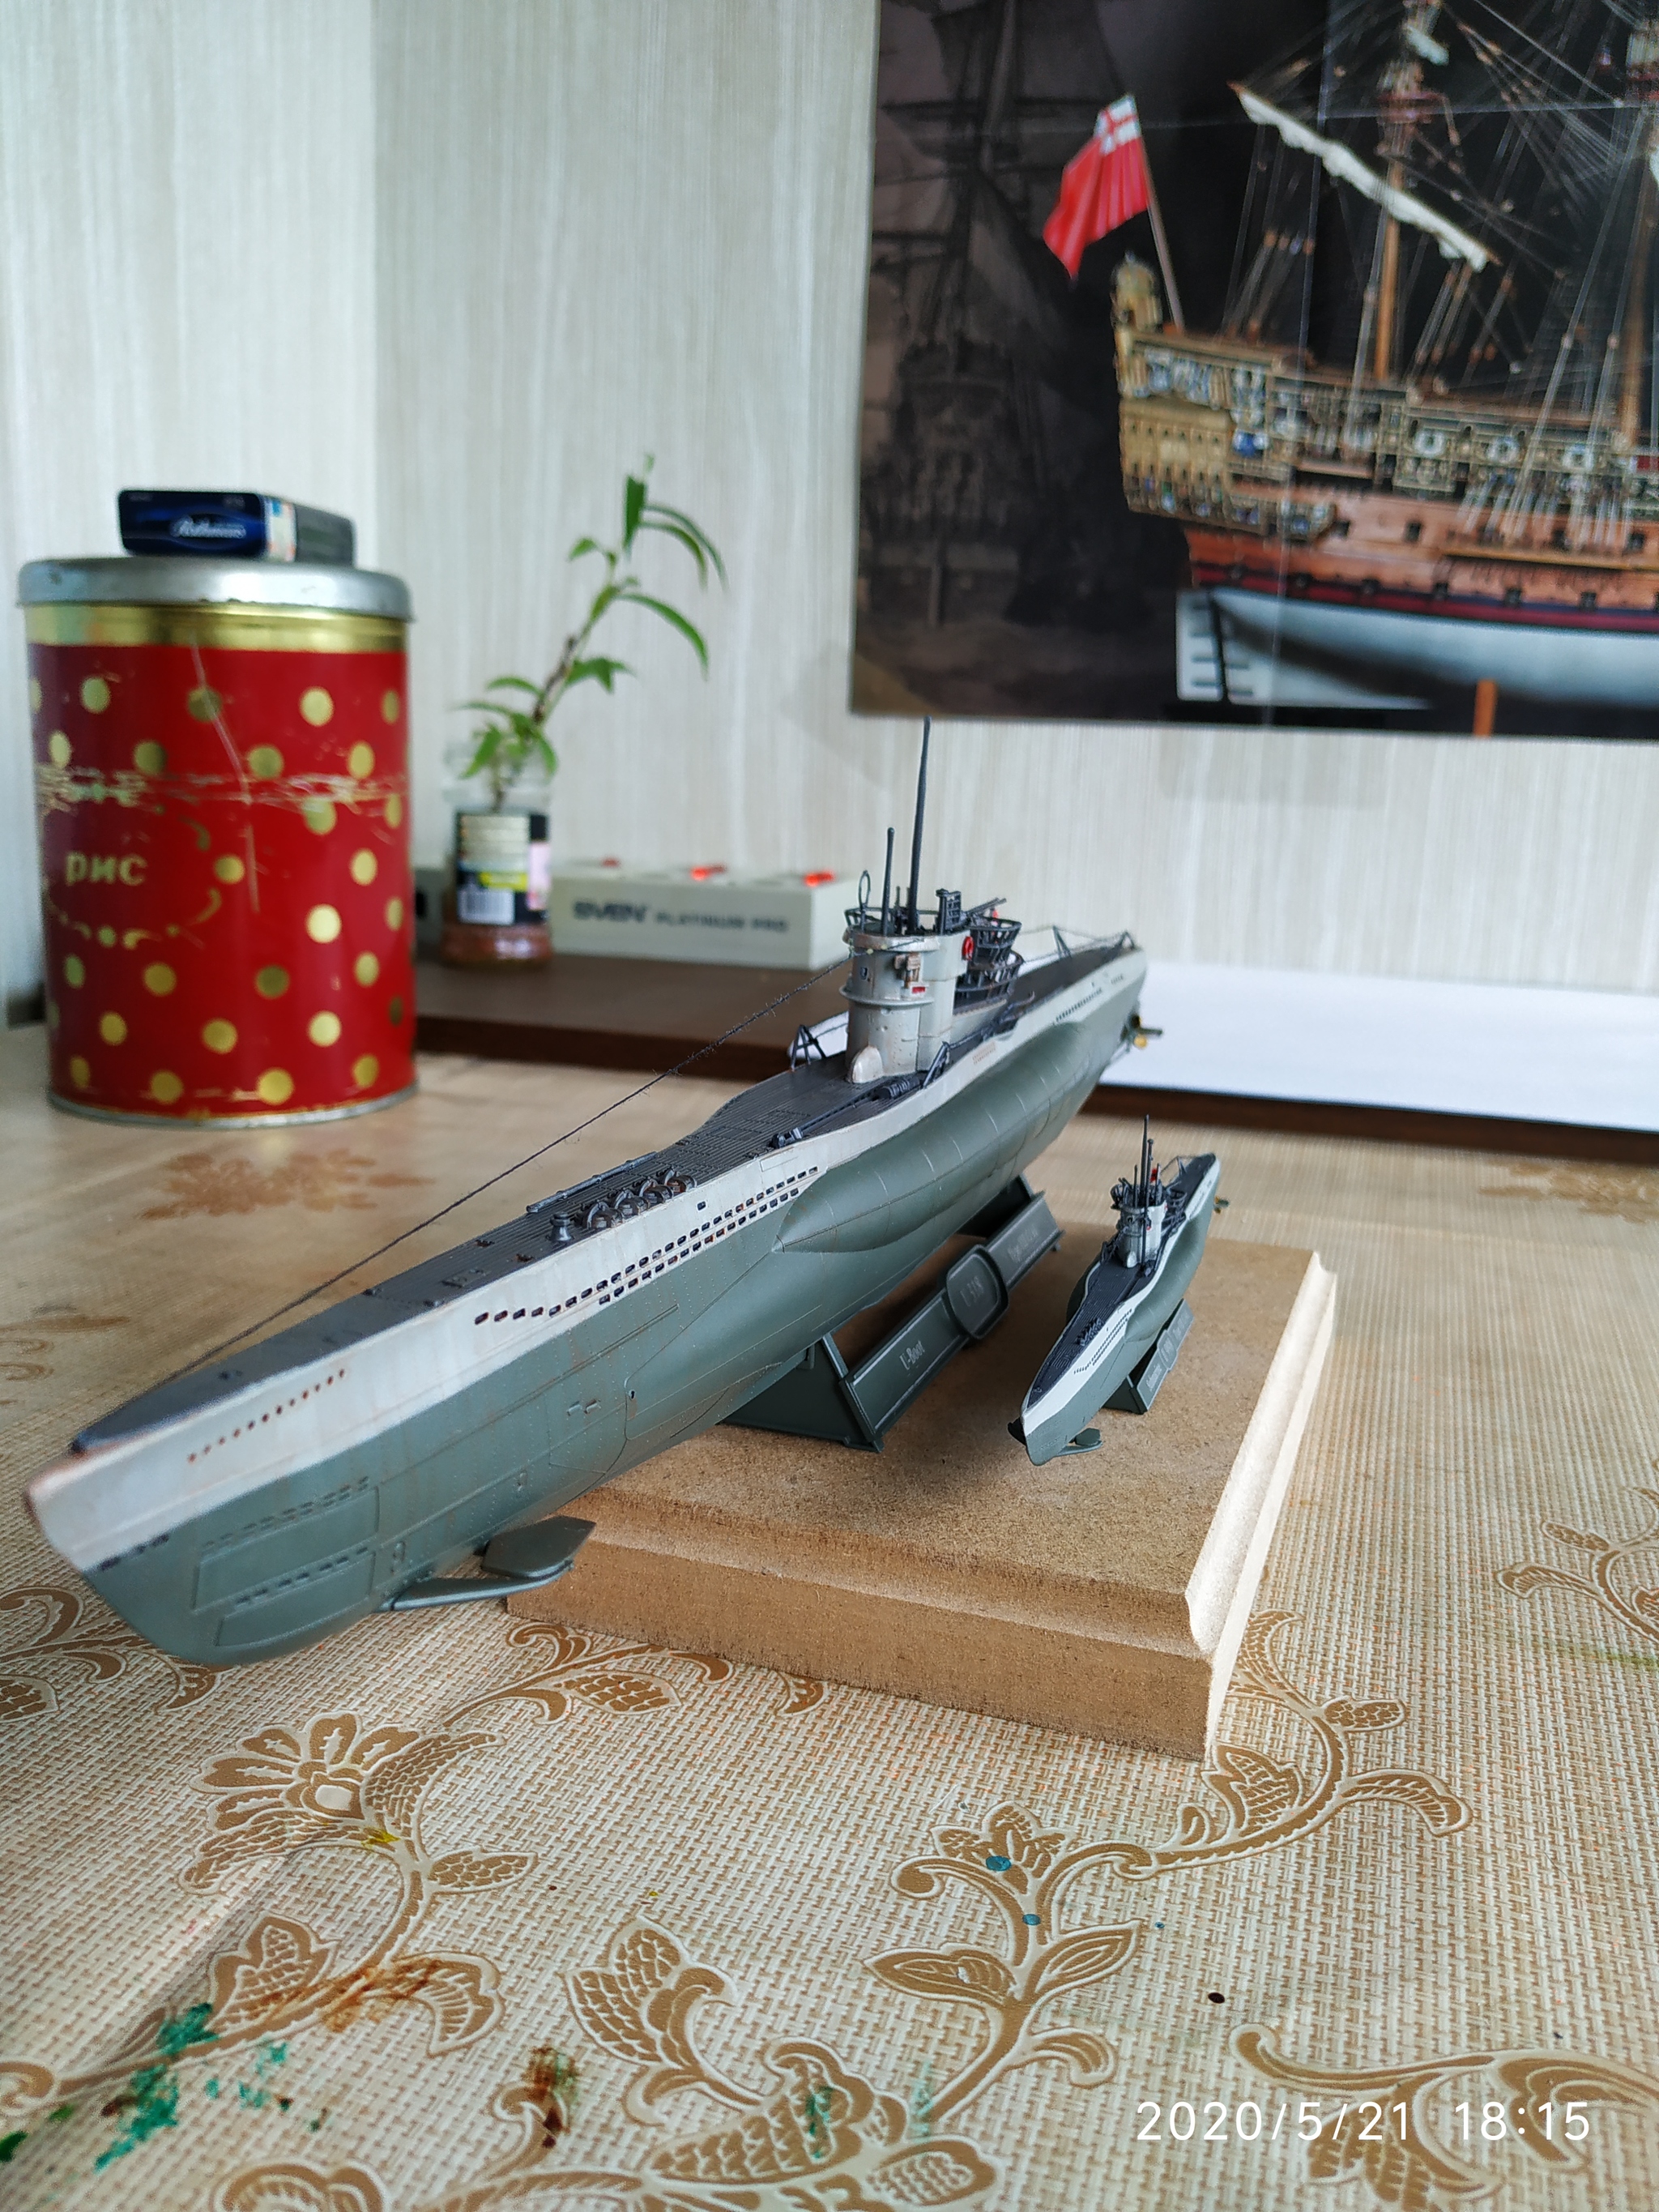 Models of German submarines of the 7th series from Rewell in scales 1:144 & 1:350 - Scale model, Modeling, Stand modeling, Ship modeling, Revell, Longpost